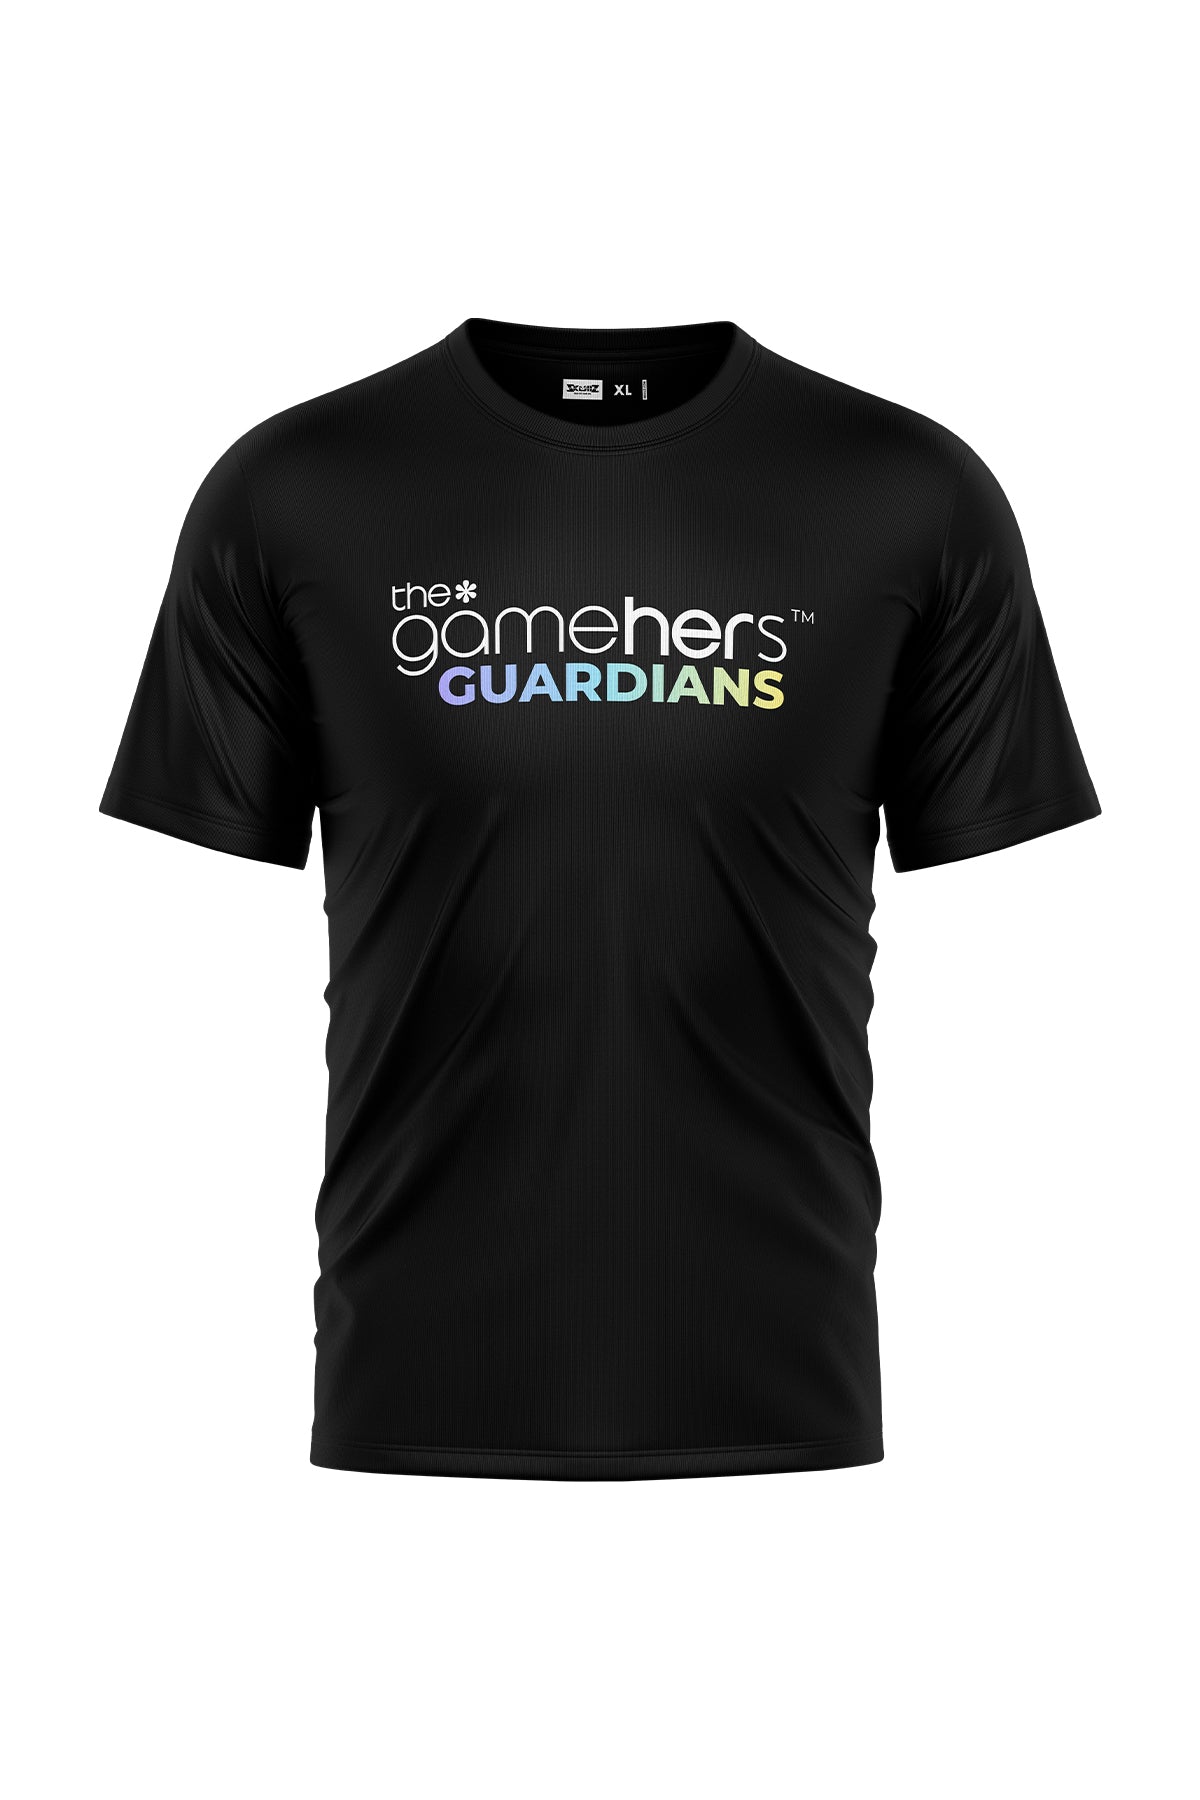 the*gamehers Guardians Unisex Tee